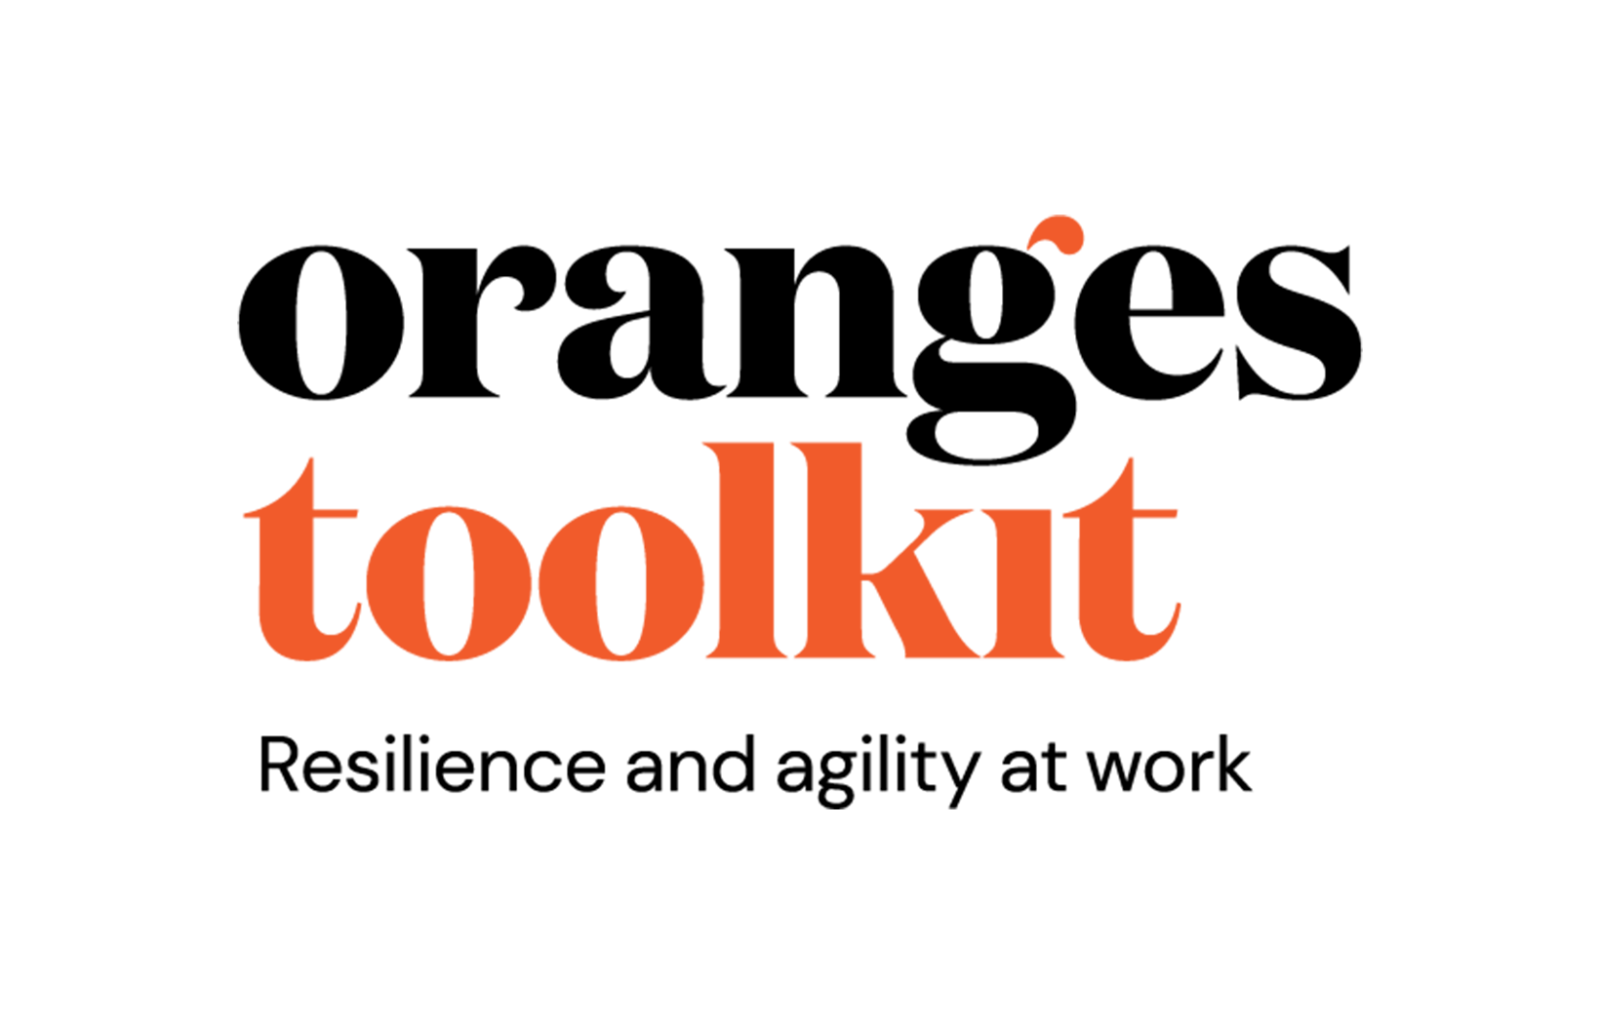 The Oranges Toolkit logo - Resilience and agility at work